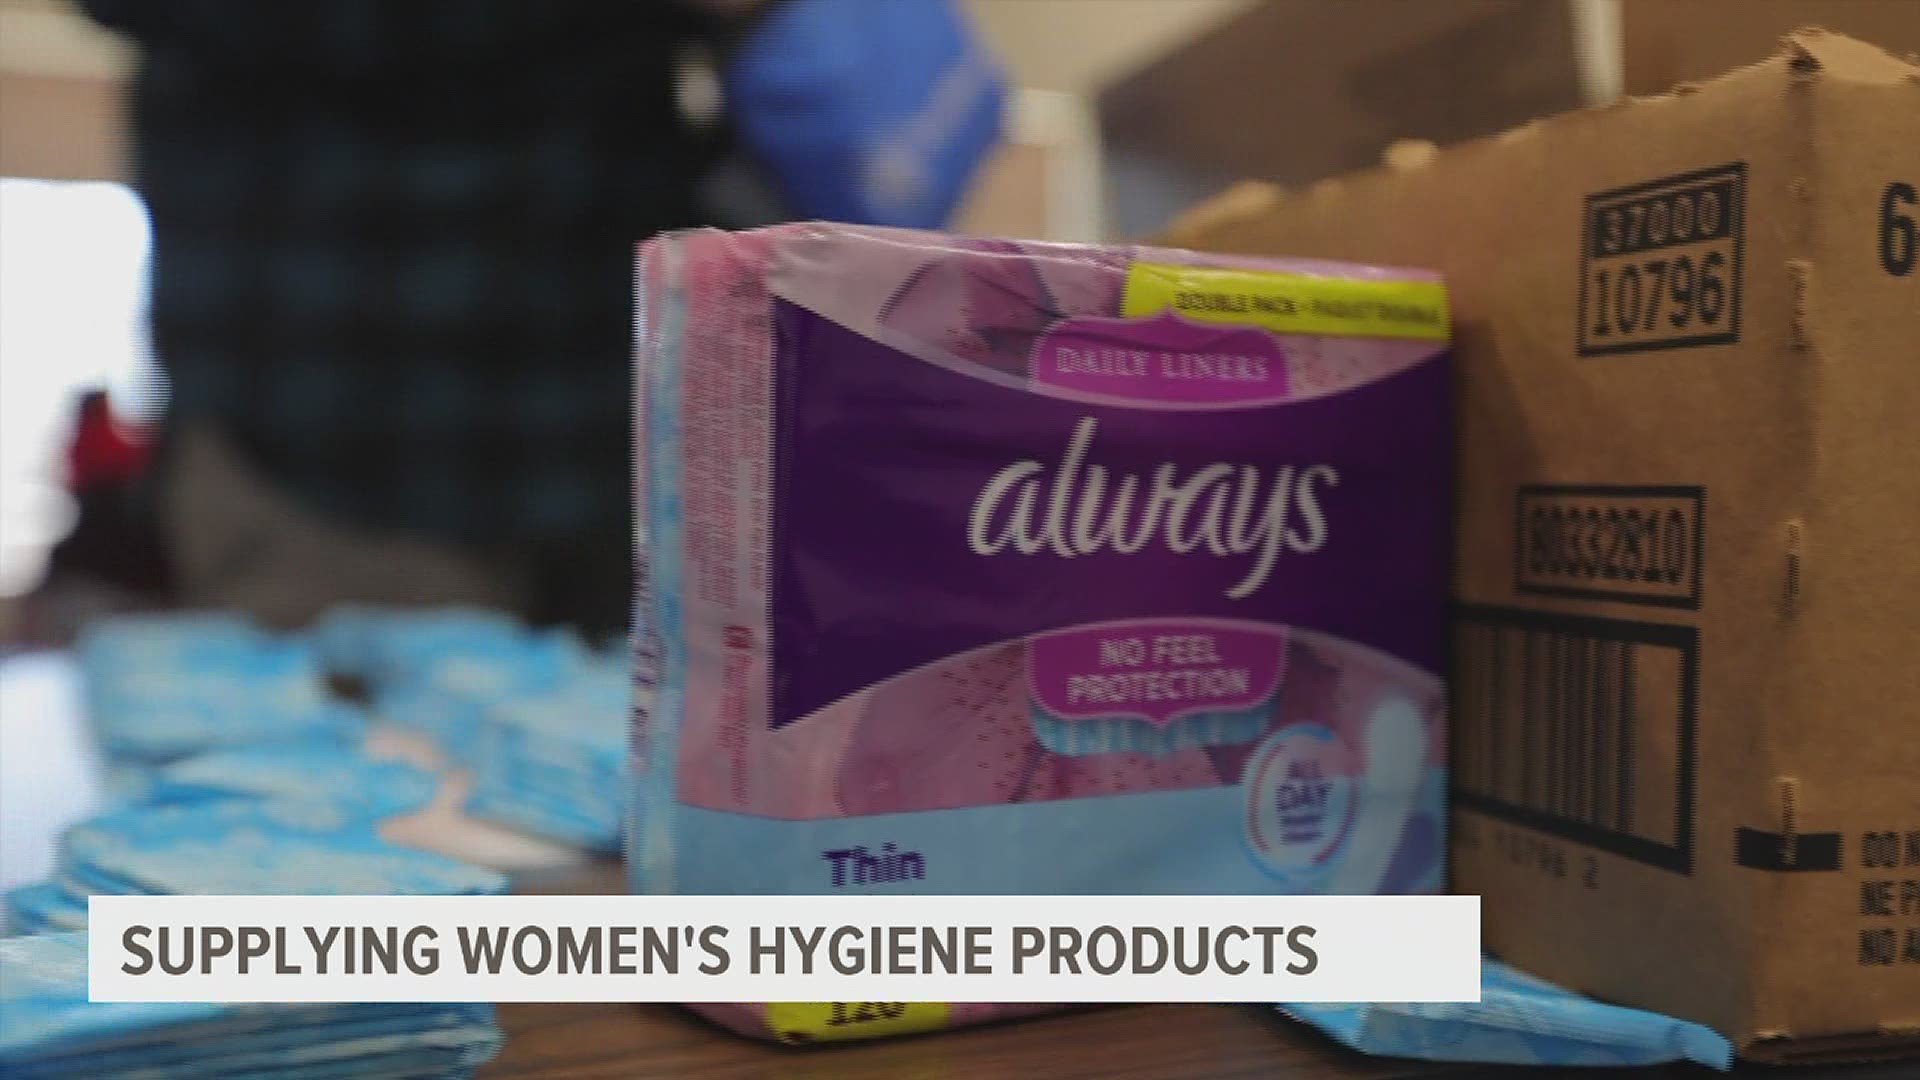 A new initiative started by a nurse at Hershey Medical Center gets women's hygiene supplies and sanitary products to low income and homeless families